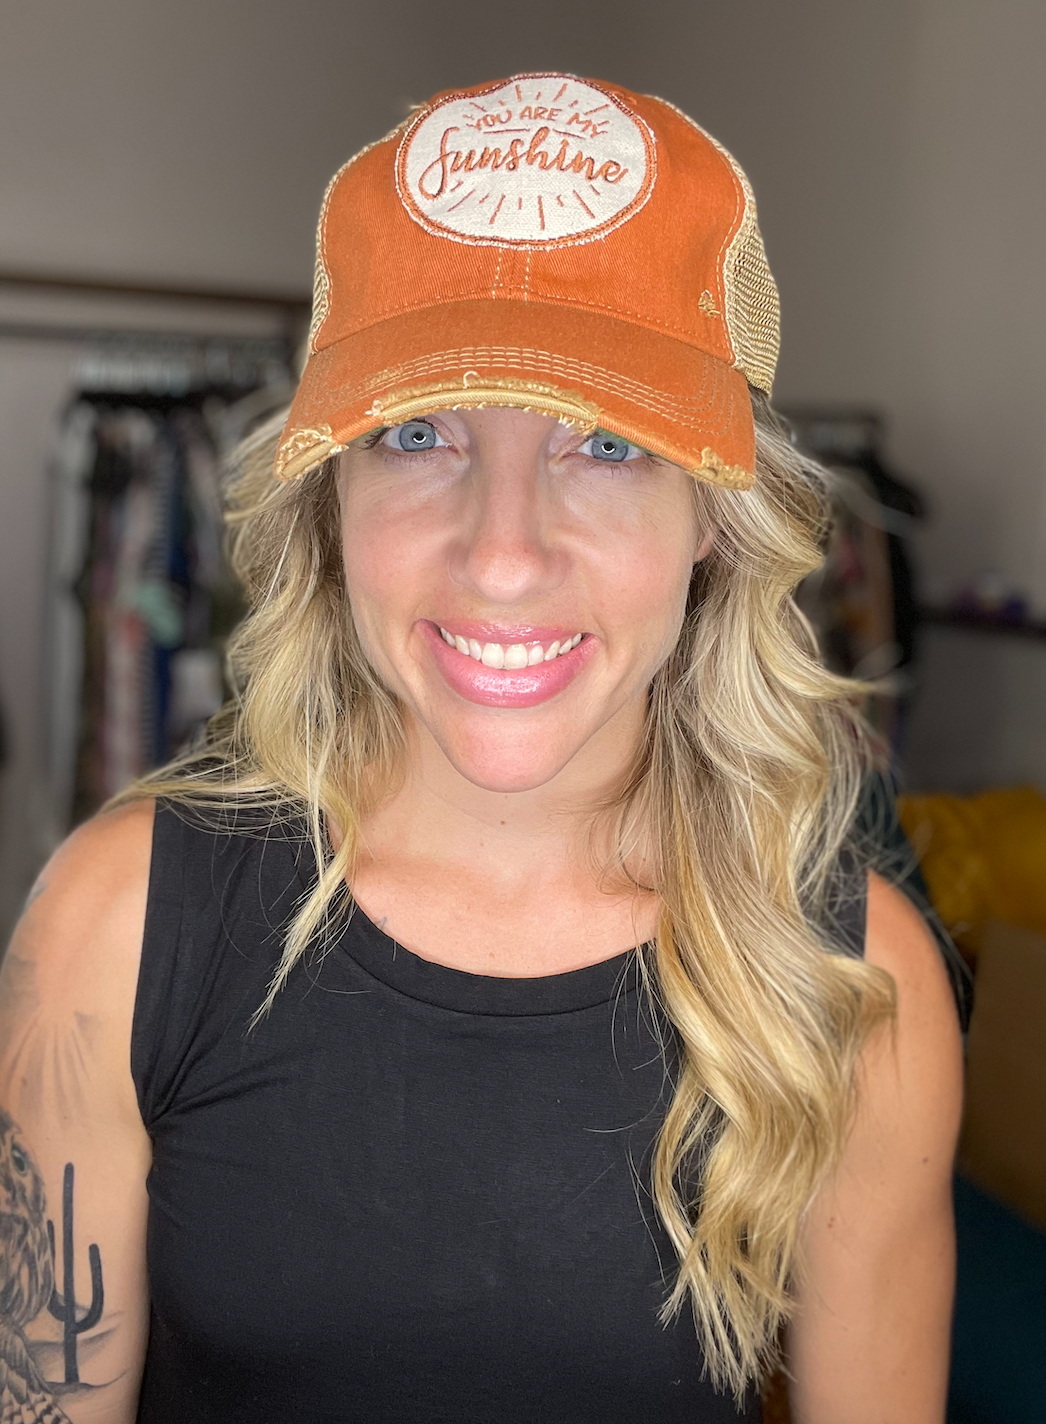 You are my Sunshine distressed trucker hat